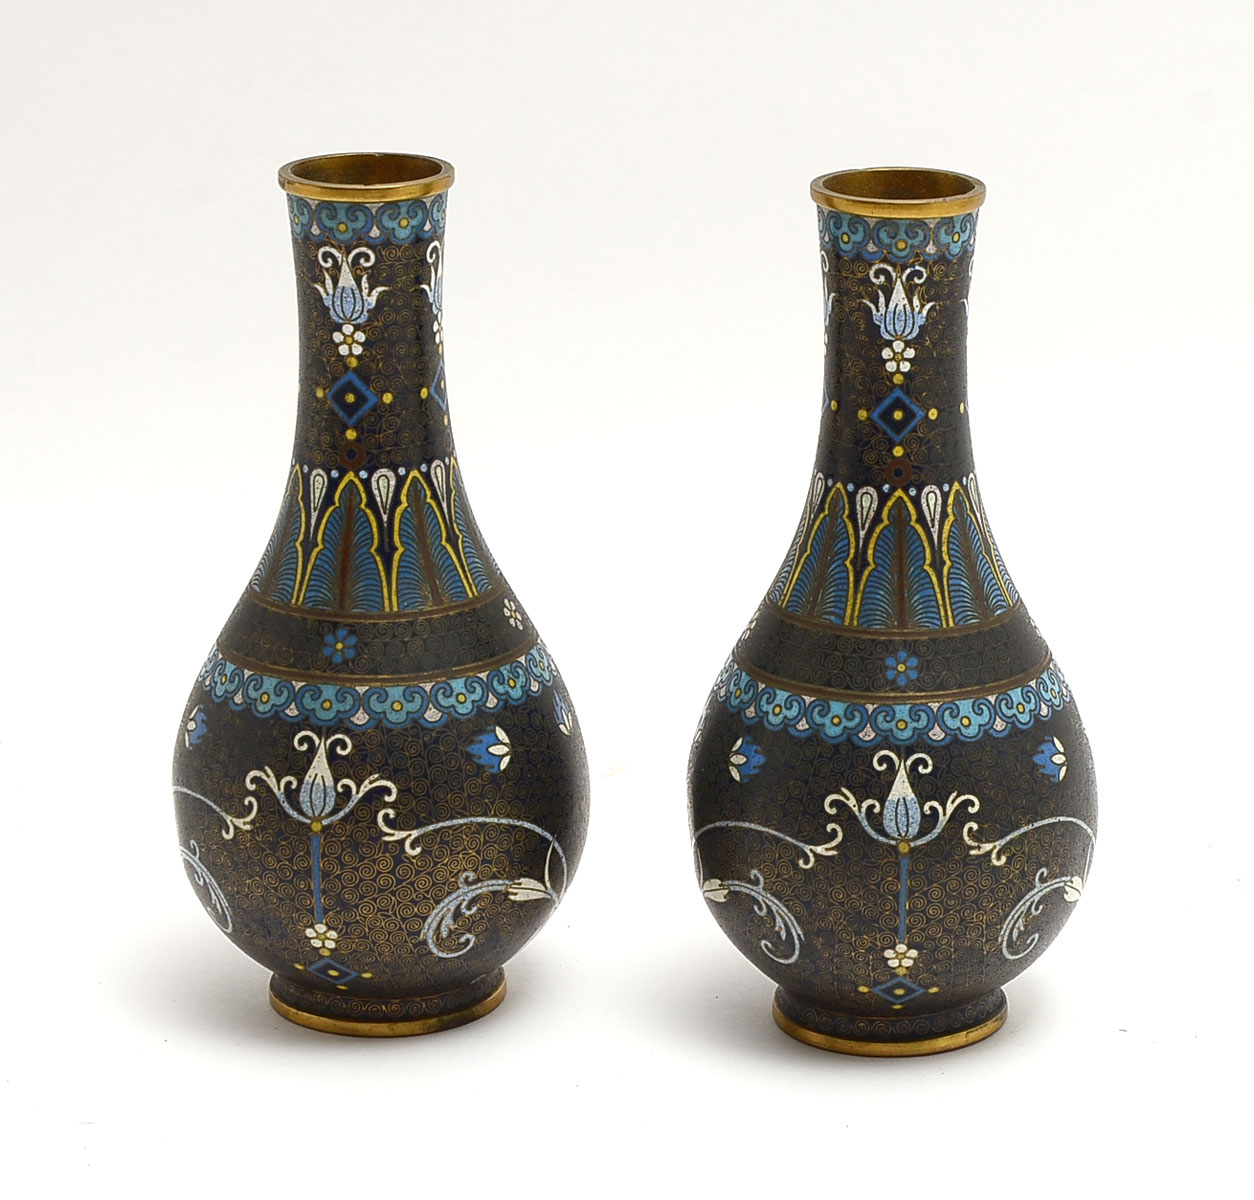 PAIR OF SMALL CHINESE 19TH C. CLOISONNE